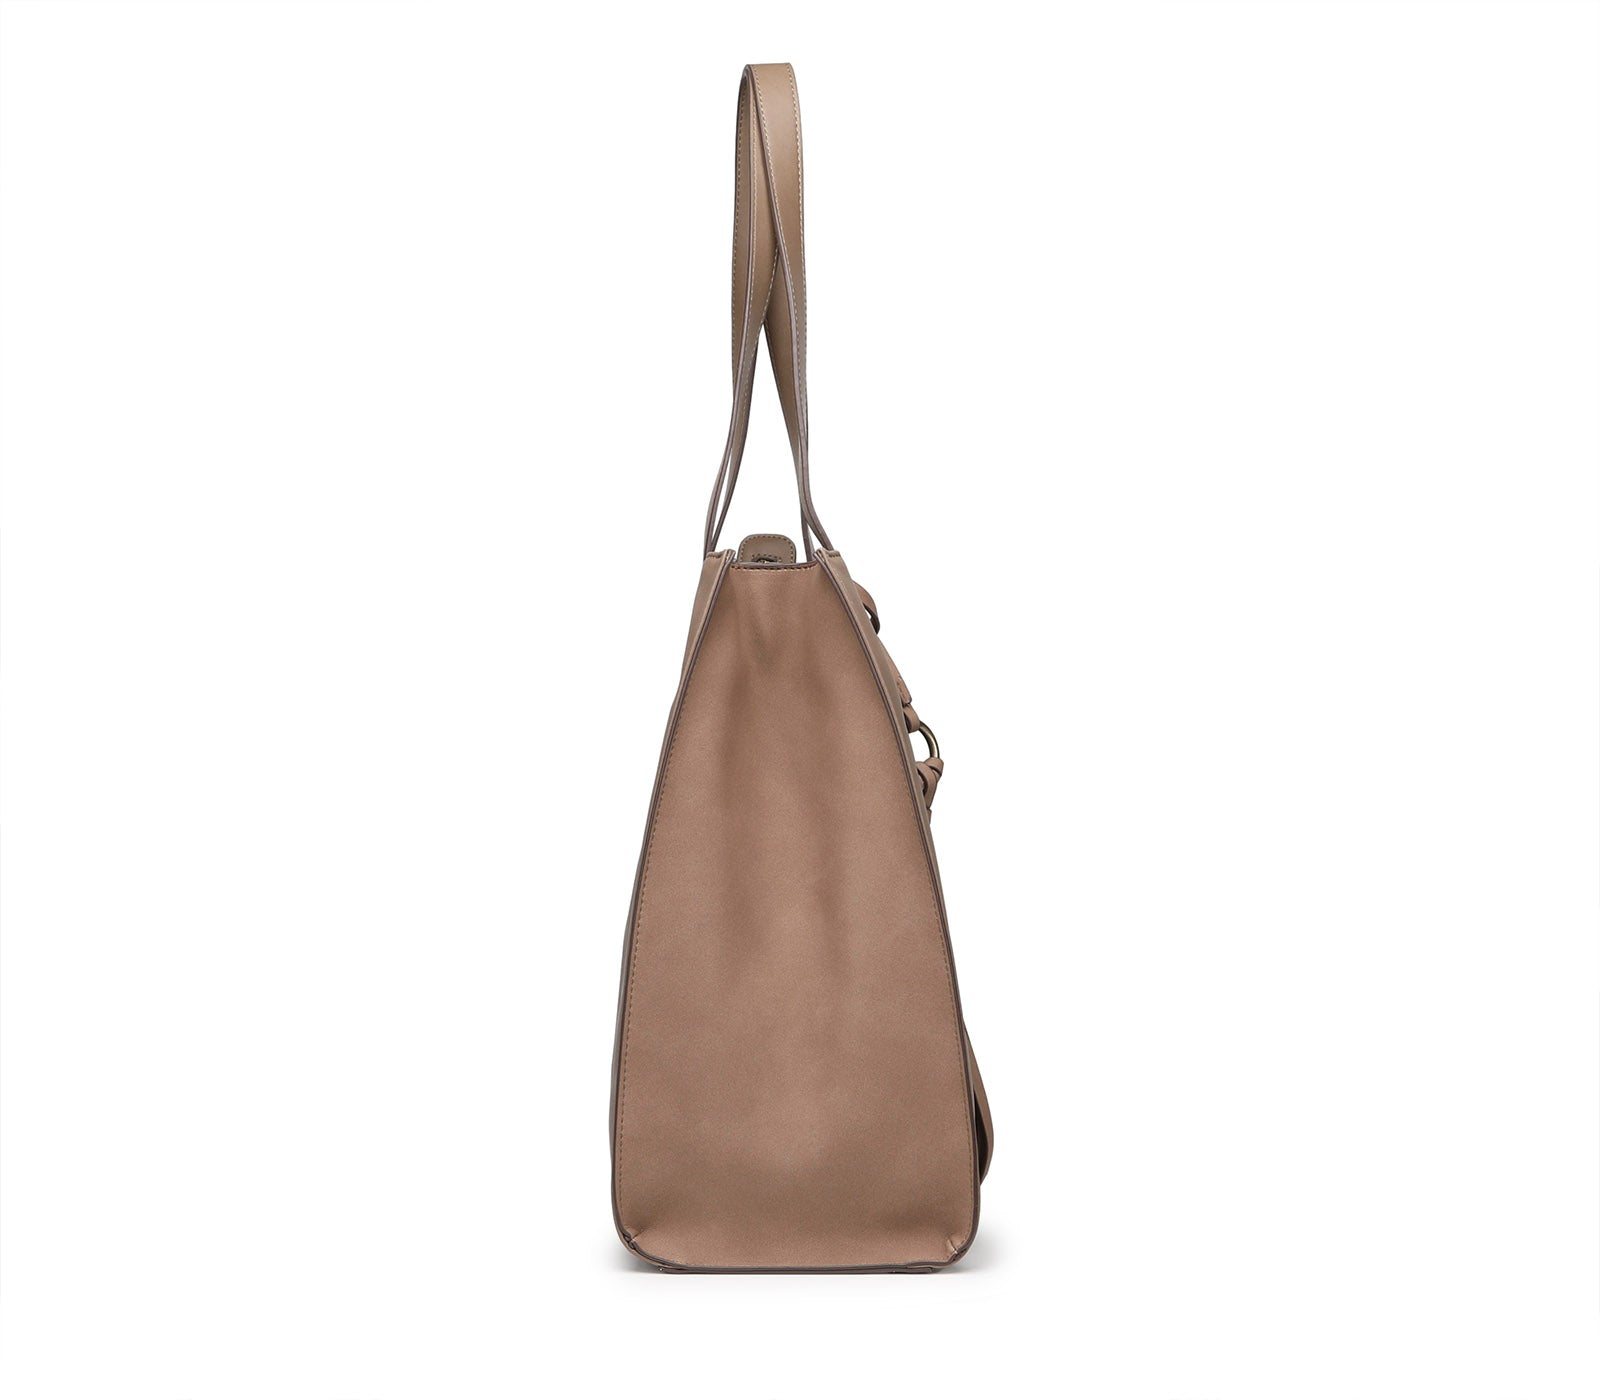 Women's Shoulder Bag with Zip Closure and Neutral Color